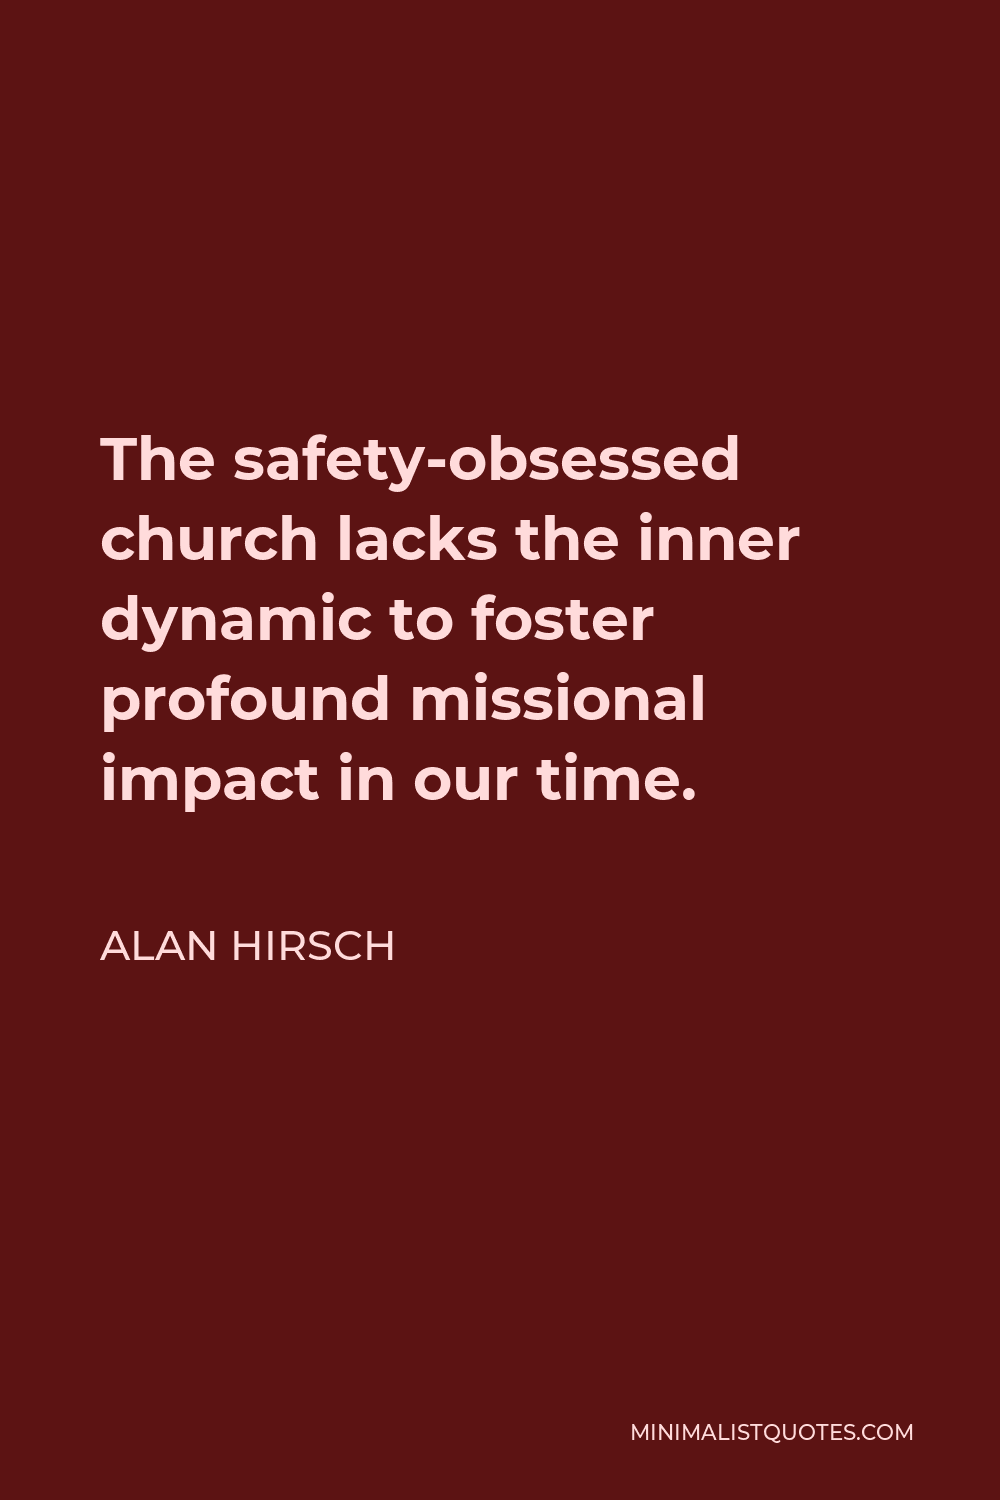 Alan Hirsch Quote - The safety-obsessed church lacks the inner dynamic to foster profound missional impact in our time.